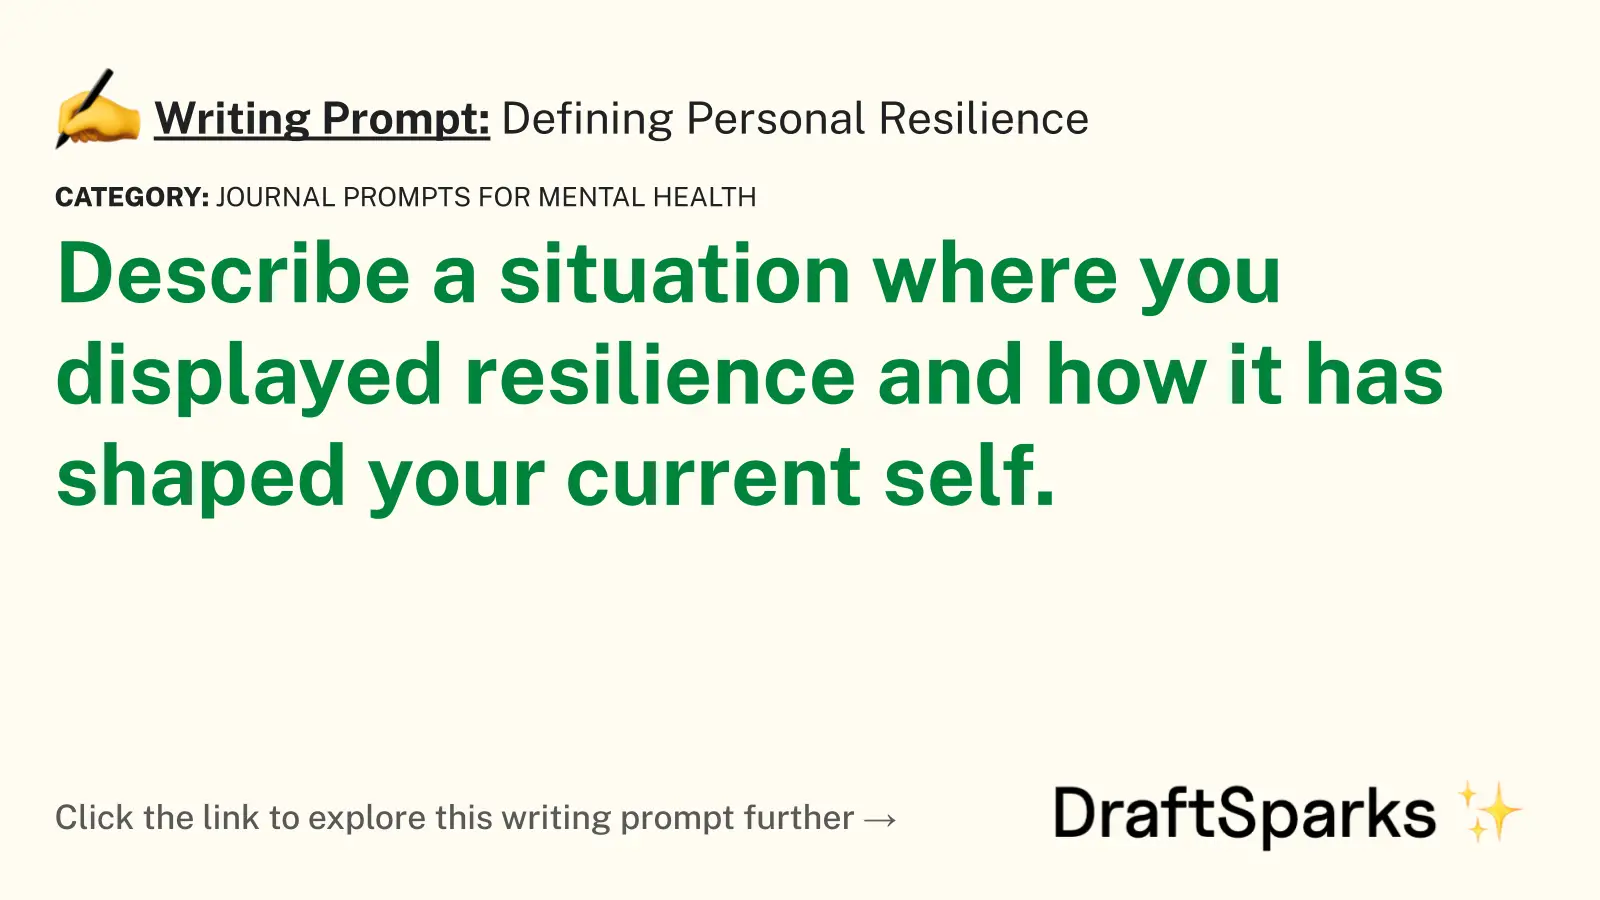 Defining Personal Resilience